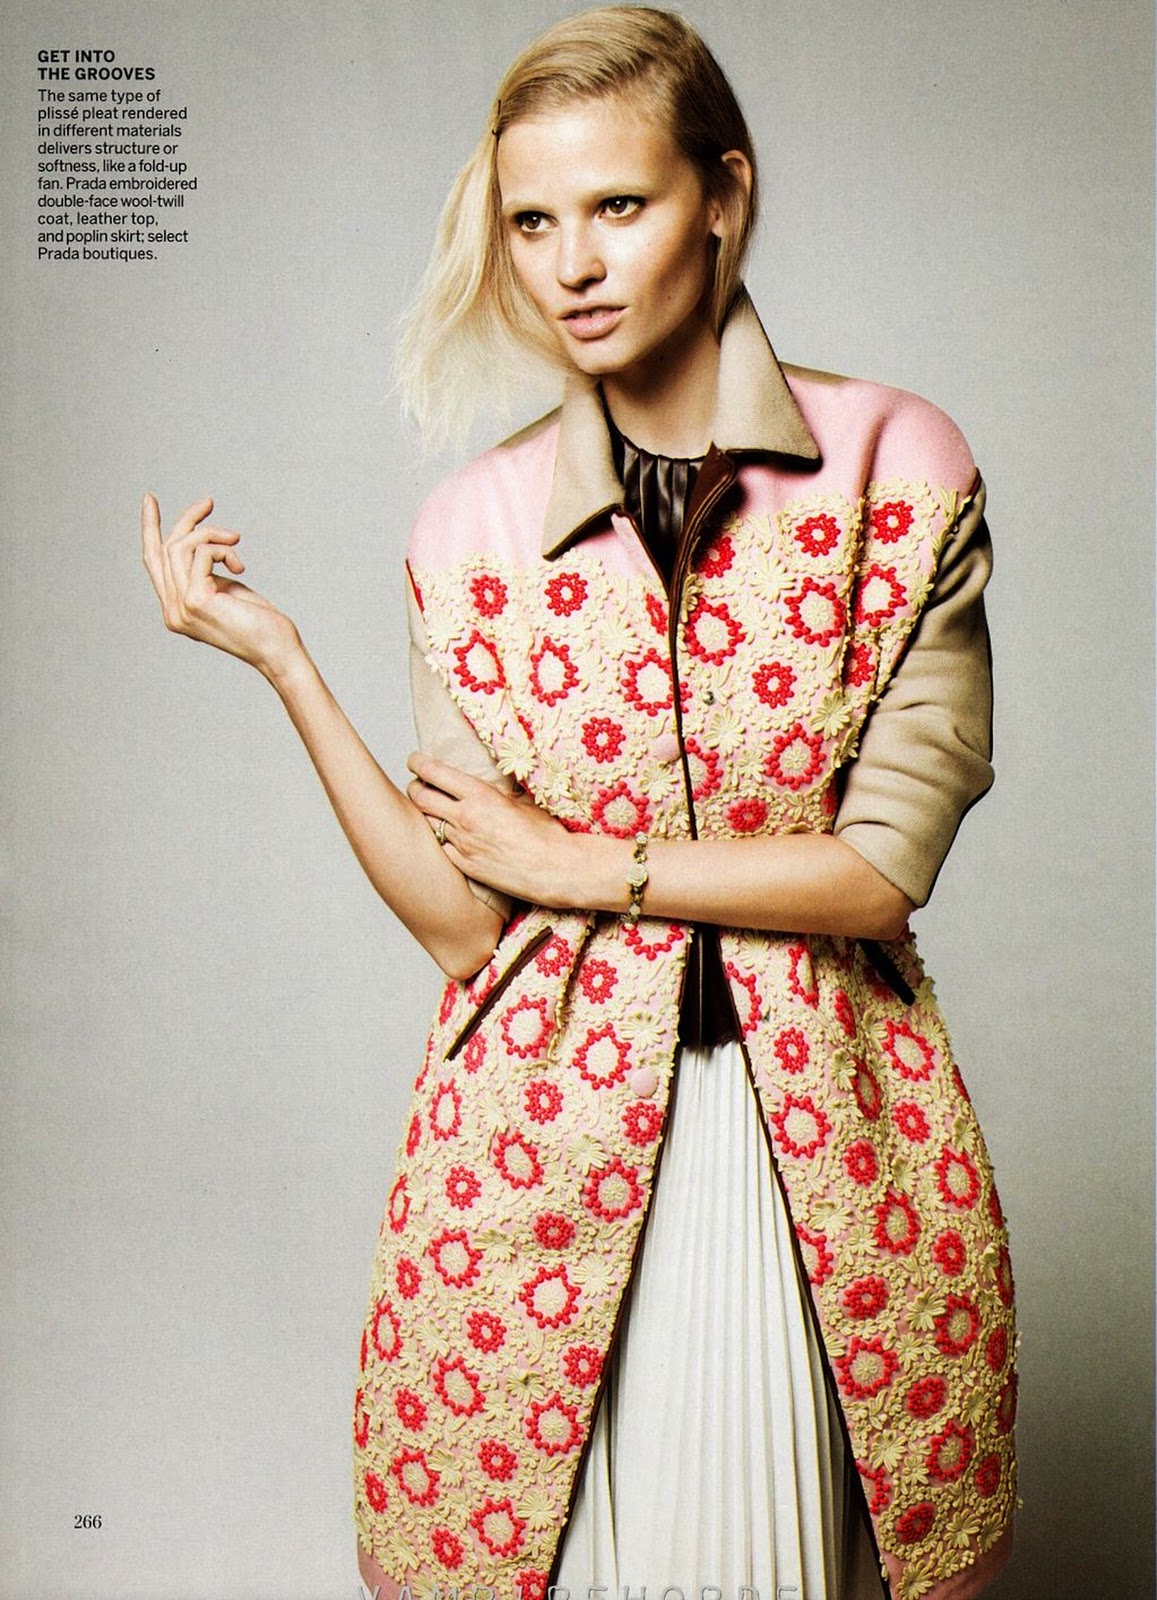 above the fold: lara stone by david sims for us vogue december 2011 ...